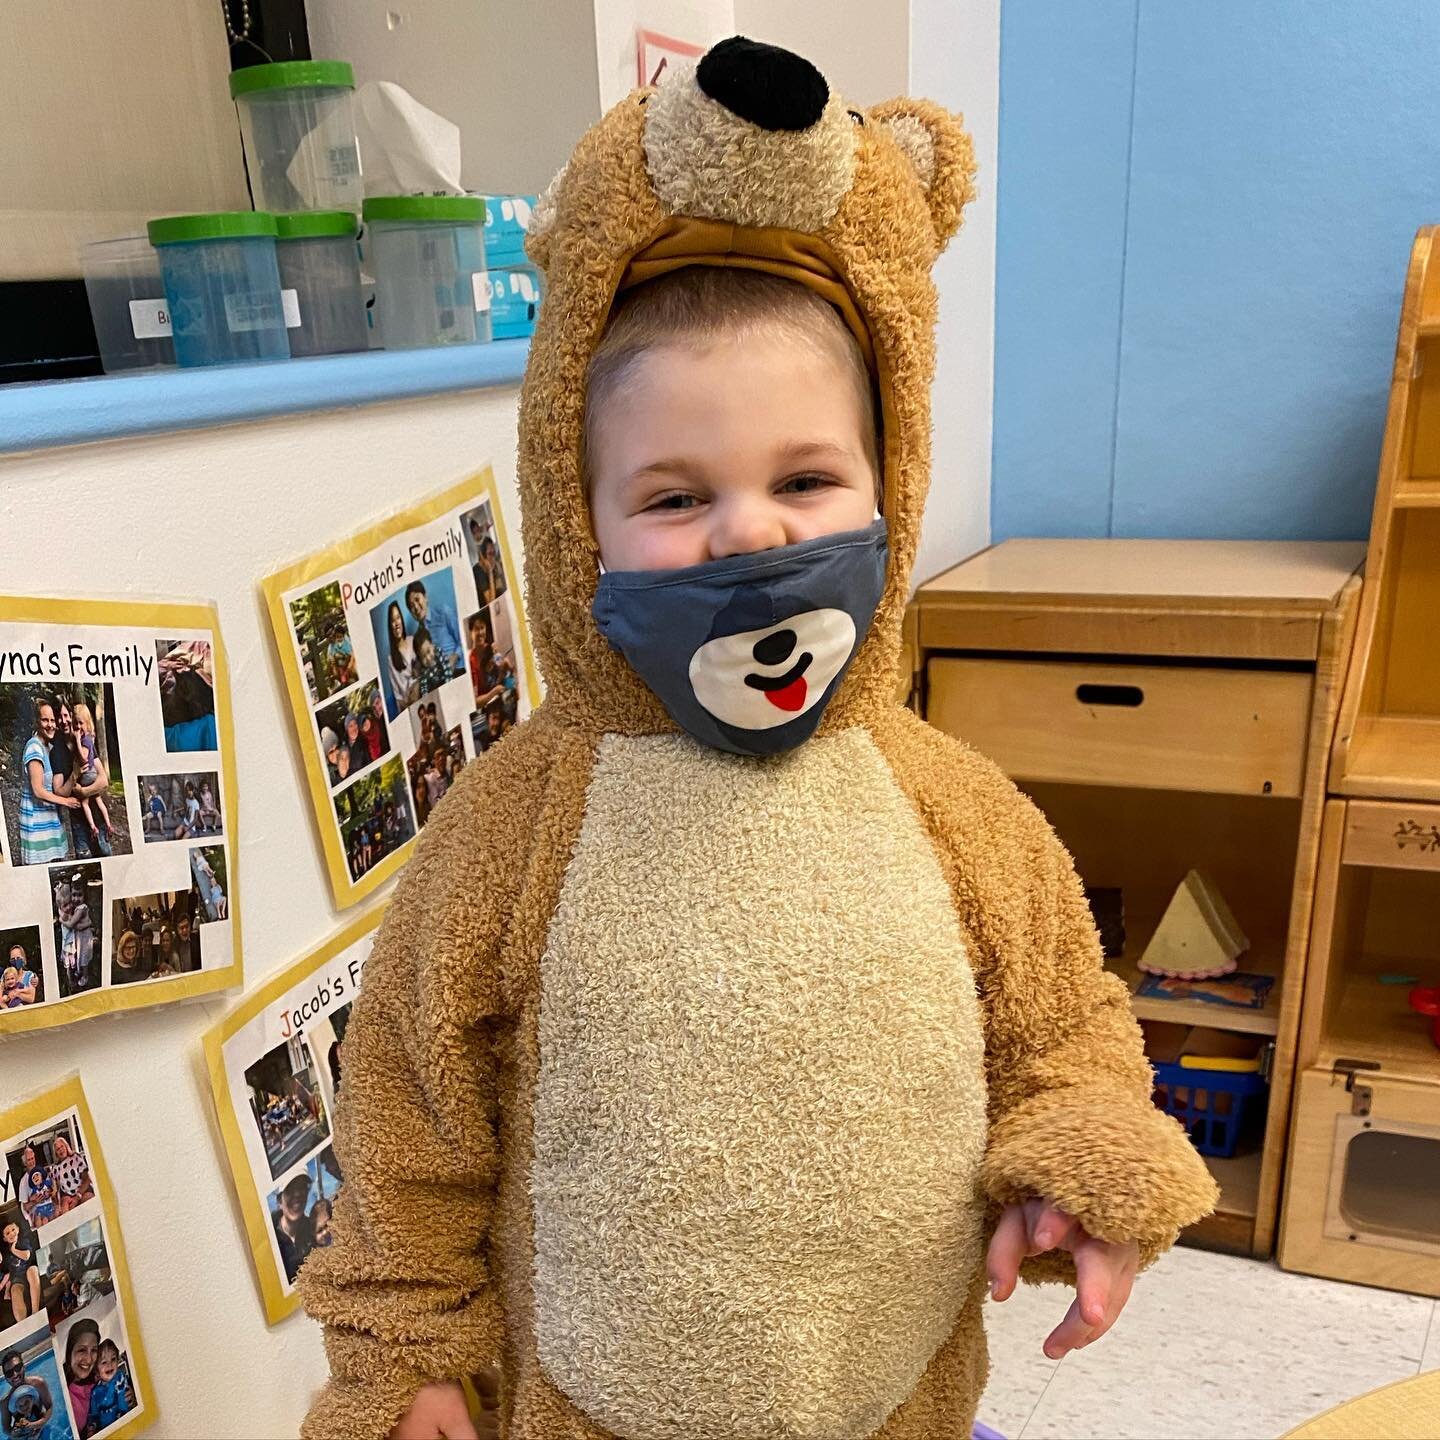 Our school was taken over by superheroes, princesses, tigers, buzz, teddy bears, Mickey Mouse and so much more! Purim was so much fun at KNS! We dressed up, sang with Cantor Malachi , made noise with our groggers, ate homemade hamantaschen, listened 